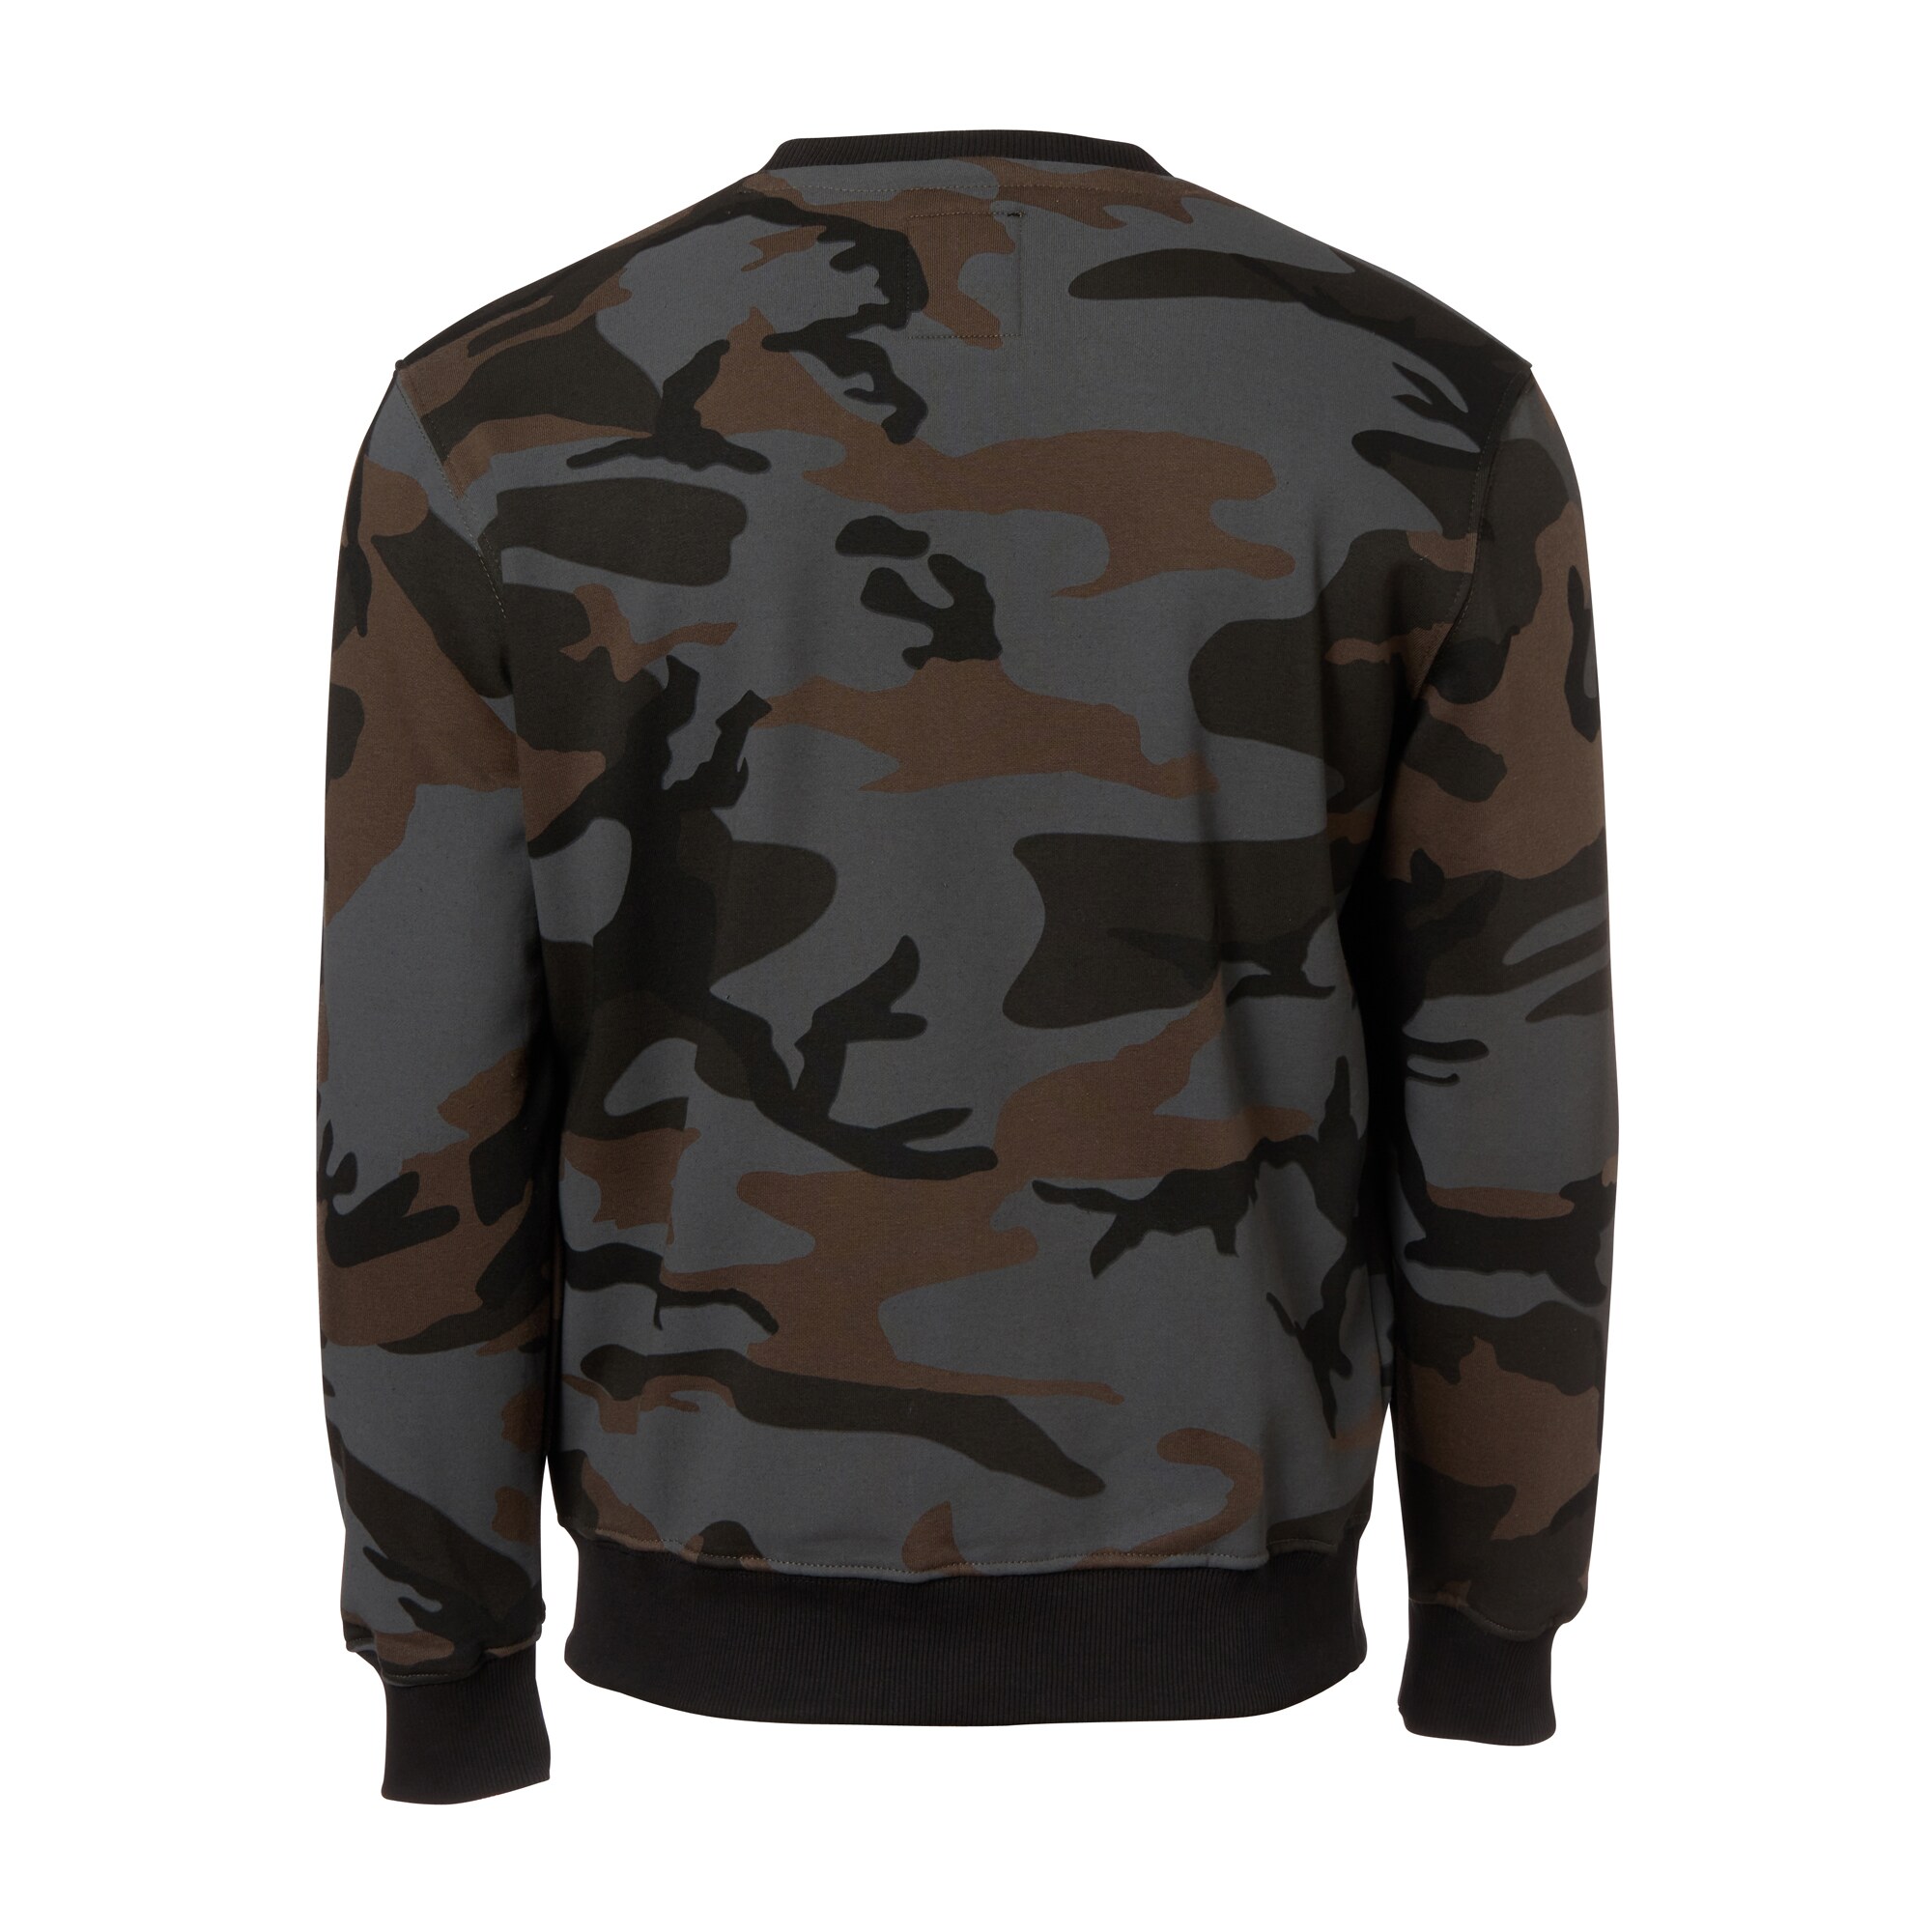 Industries Purchase Basic black the Camo Alpha Sweater Pullover